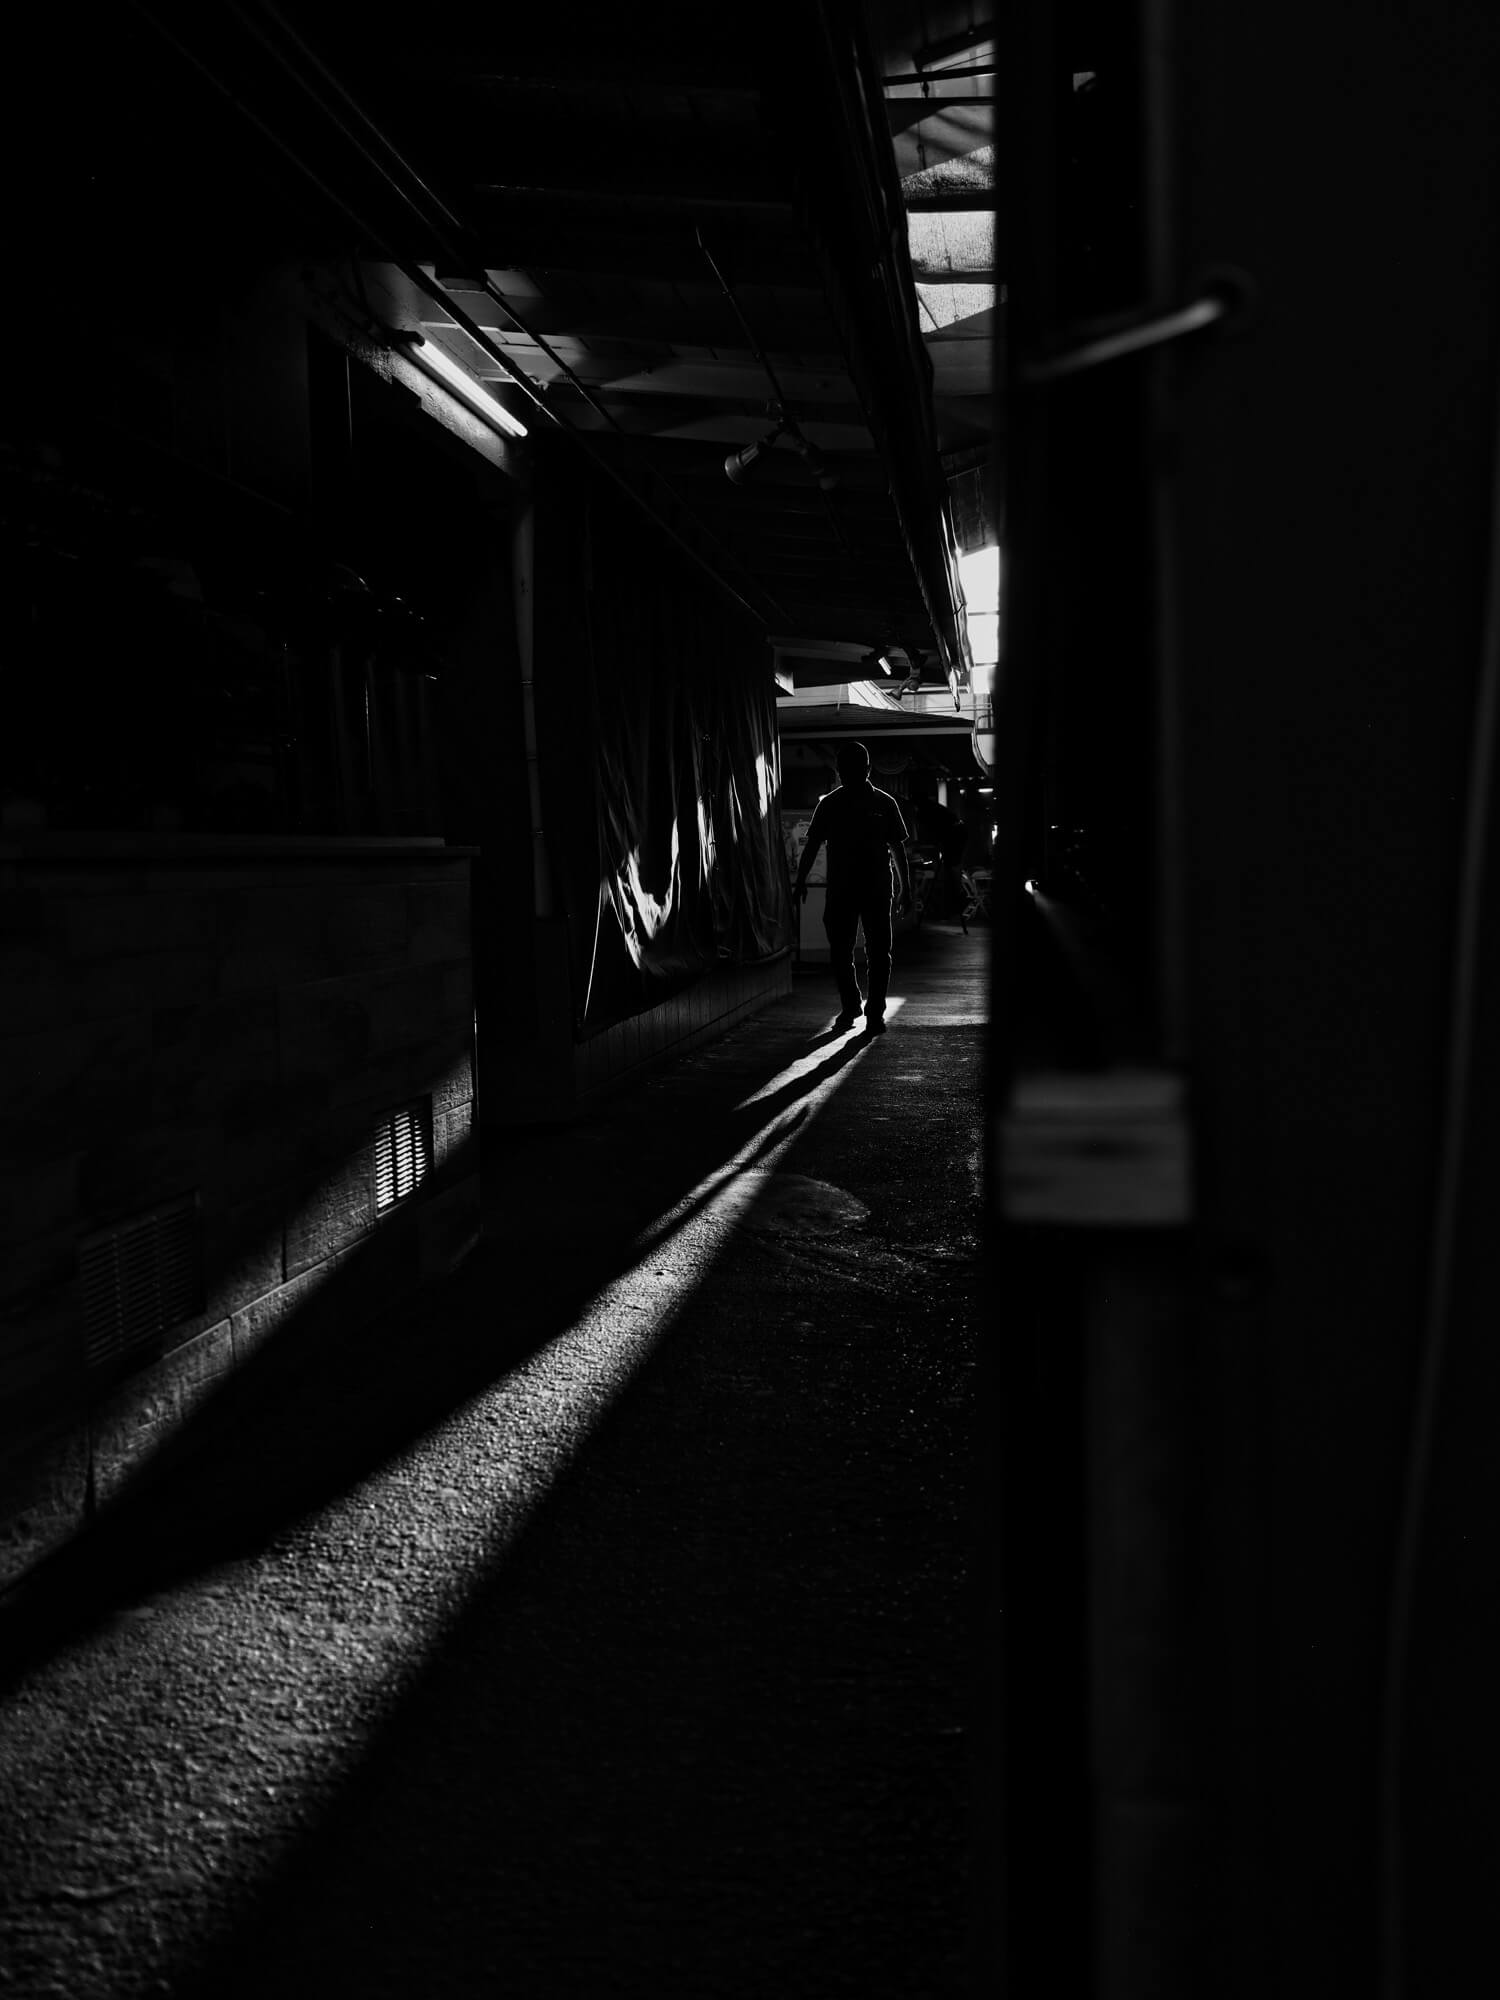 Silhouette of man standing at the end of a shadowy alleyway